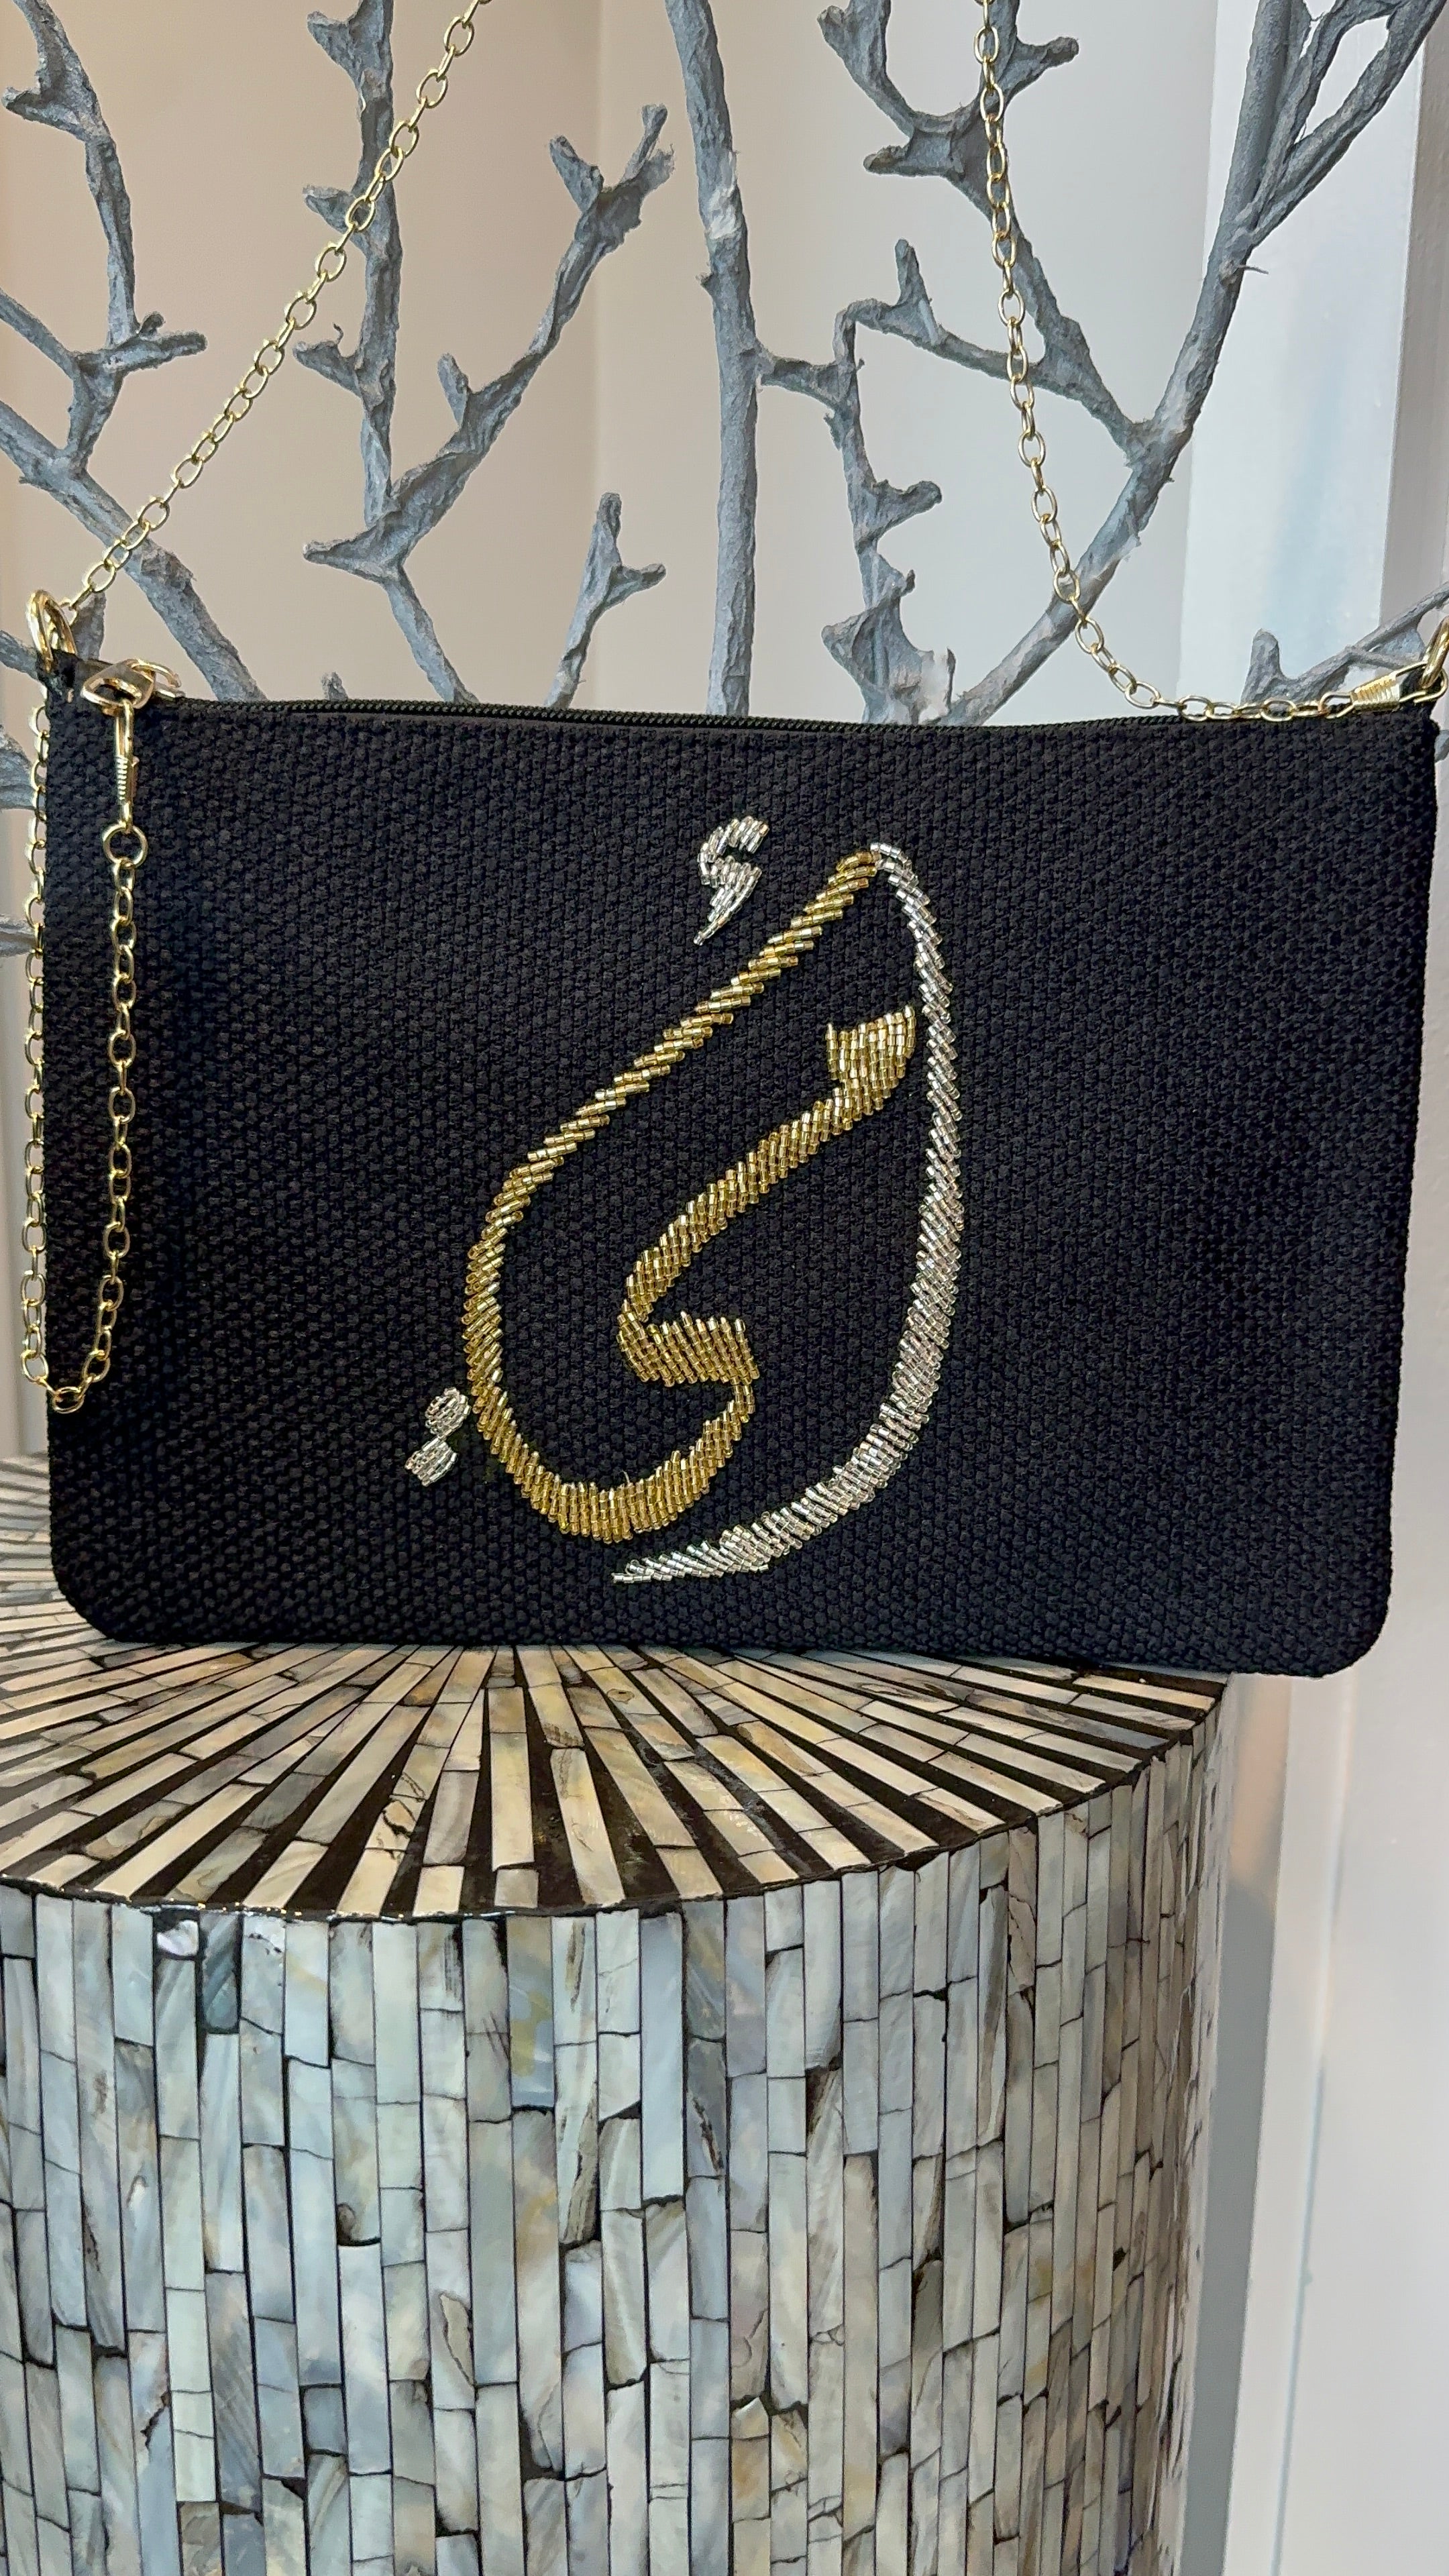 Black Clutch with Silver and Gold beading أمي